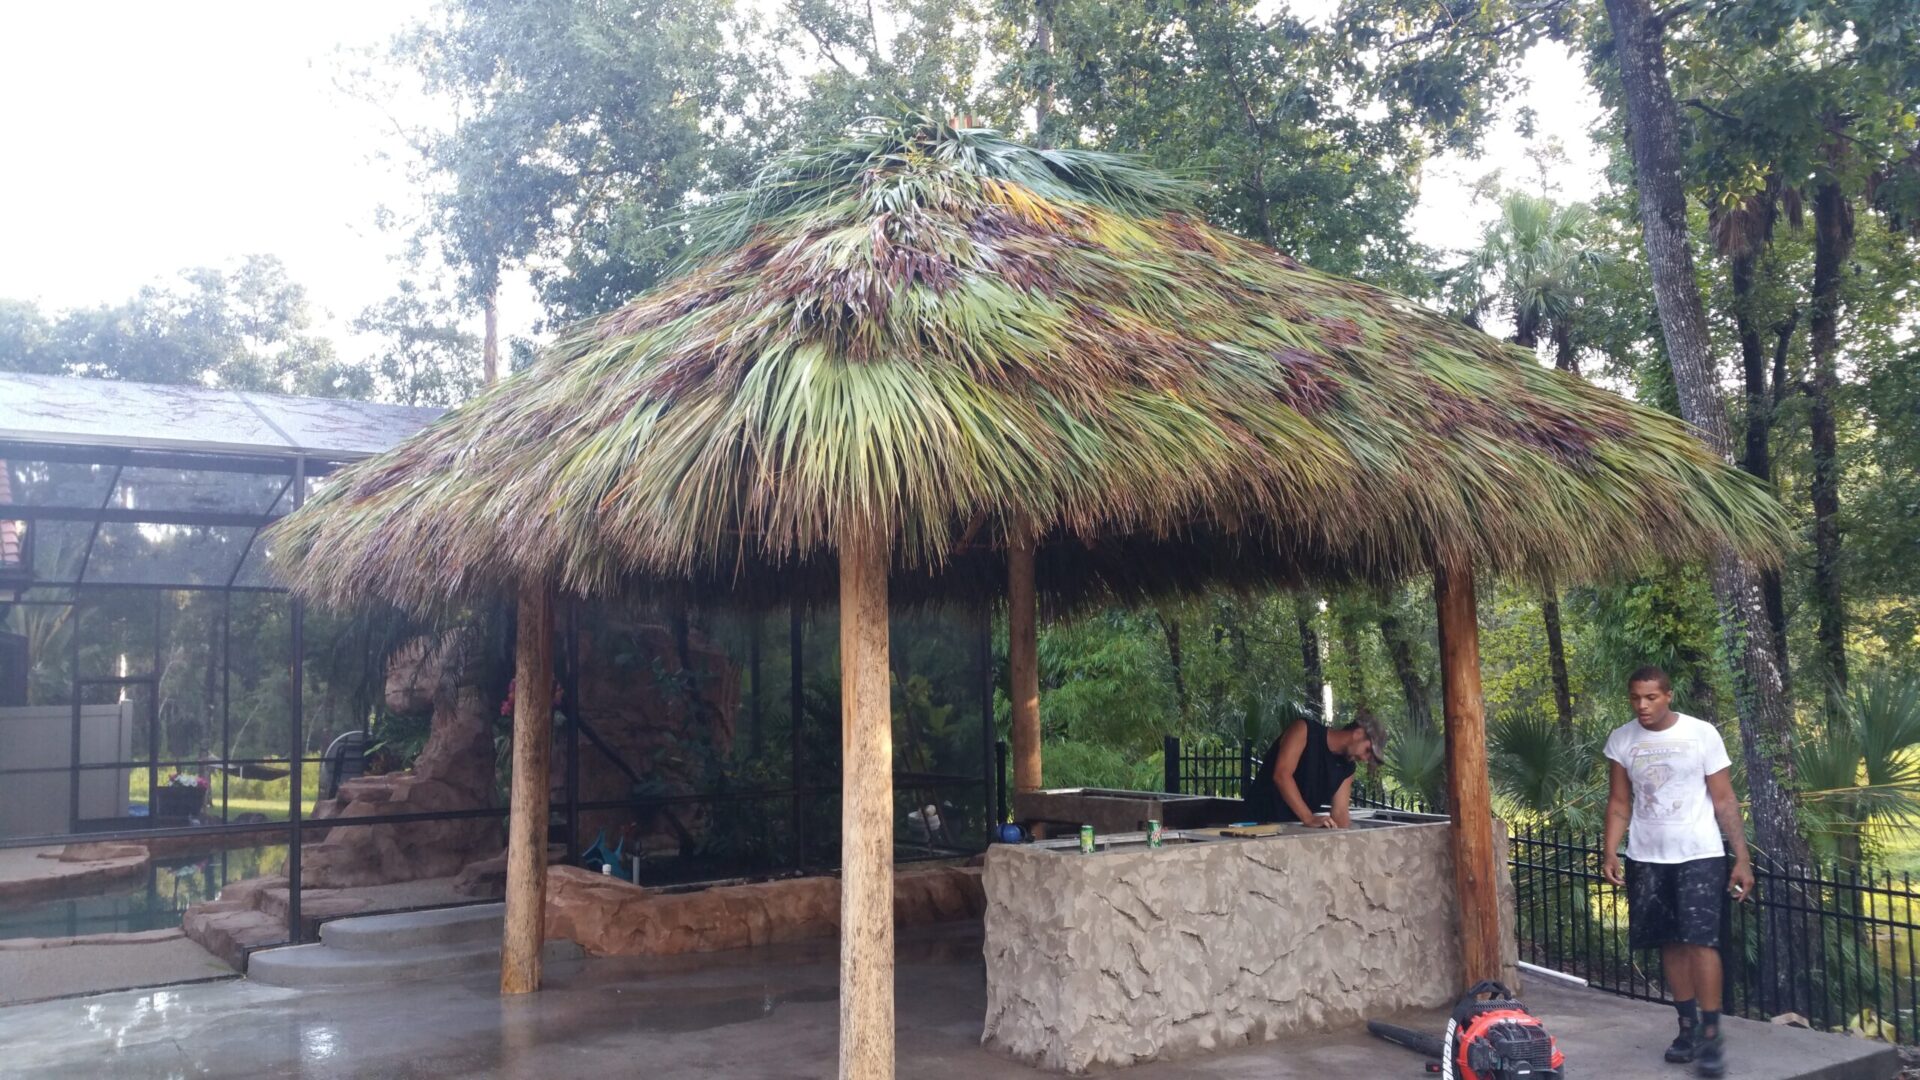 A man is working on a tiki hut at a zoo.